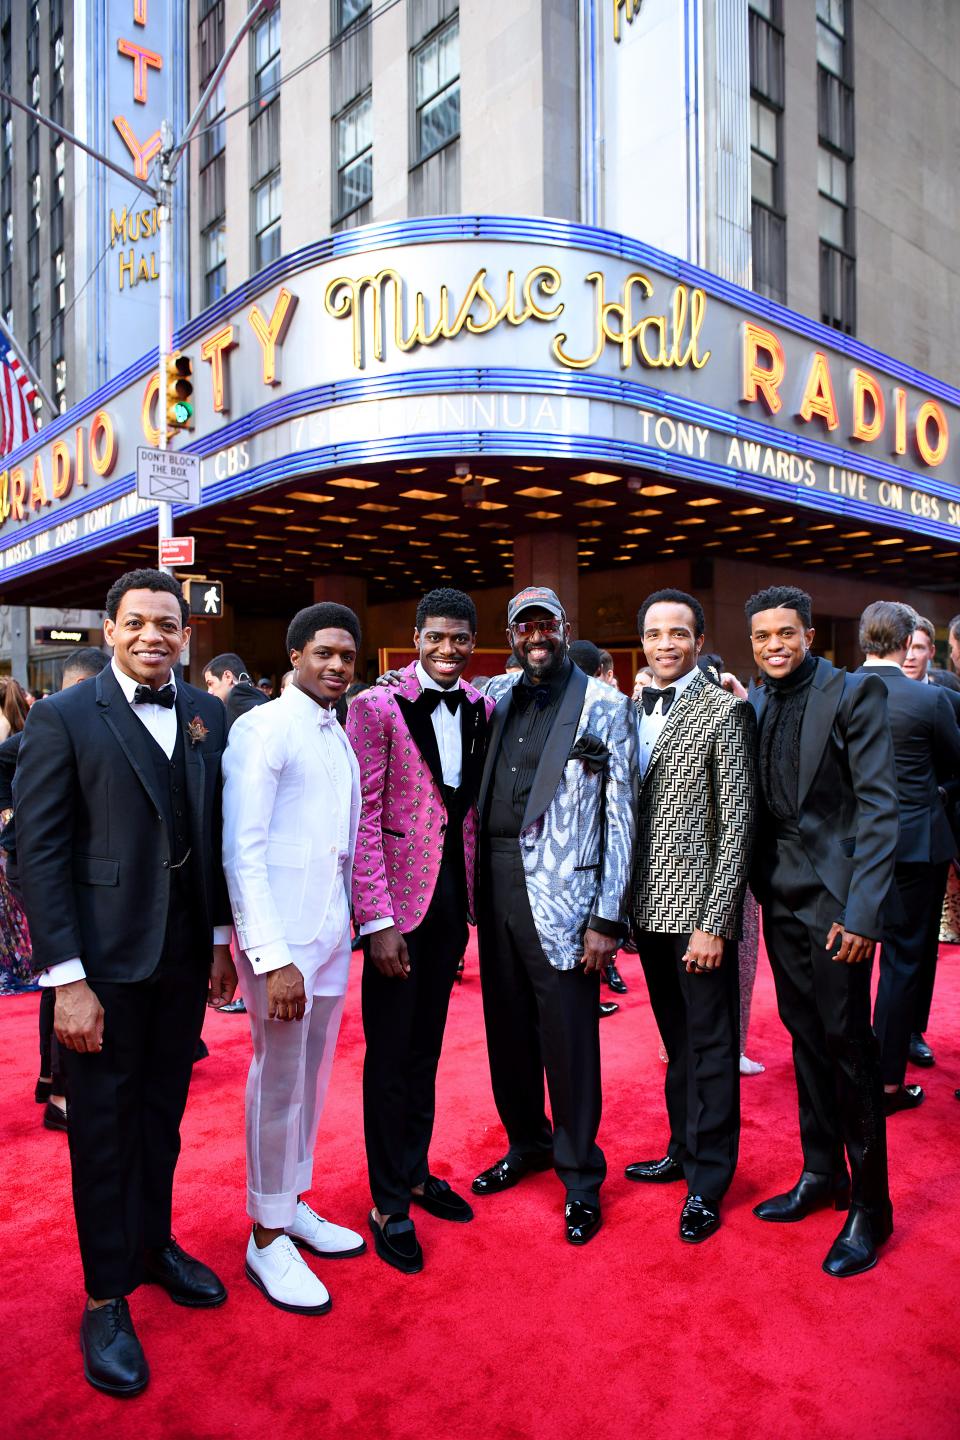 The Temptations' Otis Williams (in ballcap) poses with Jawan Jackson and other cast members of "Ain't Too Proud" at the Tony Awards in New York on June 9, 2019.